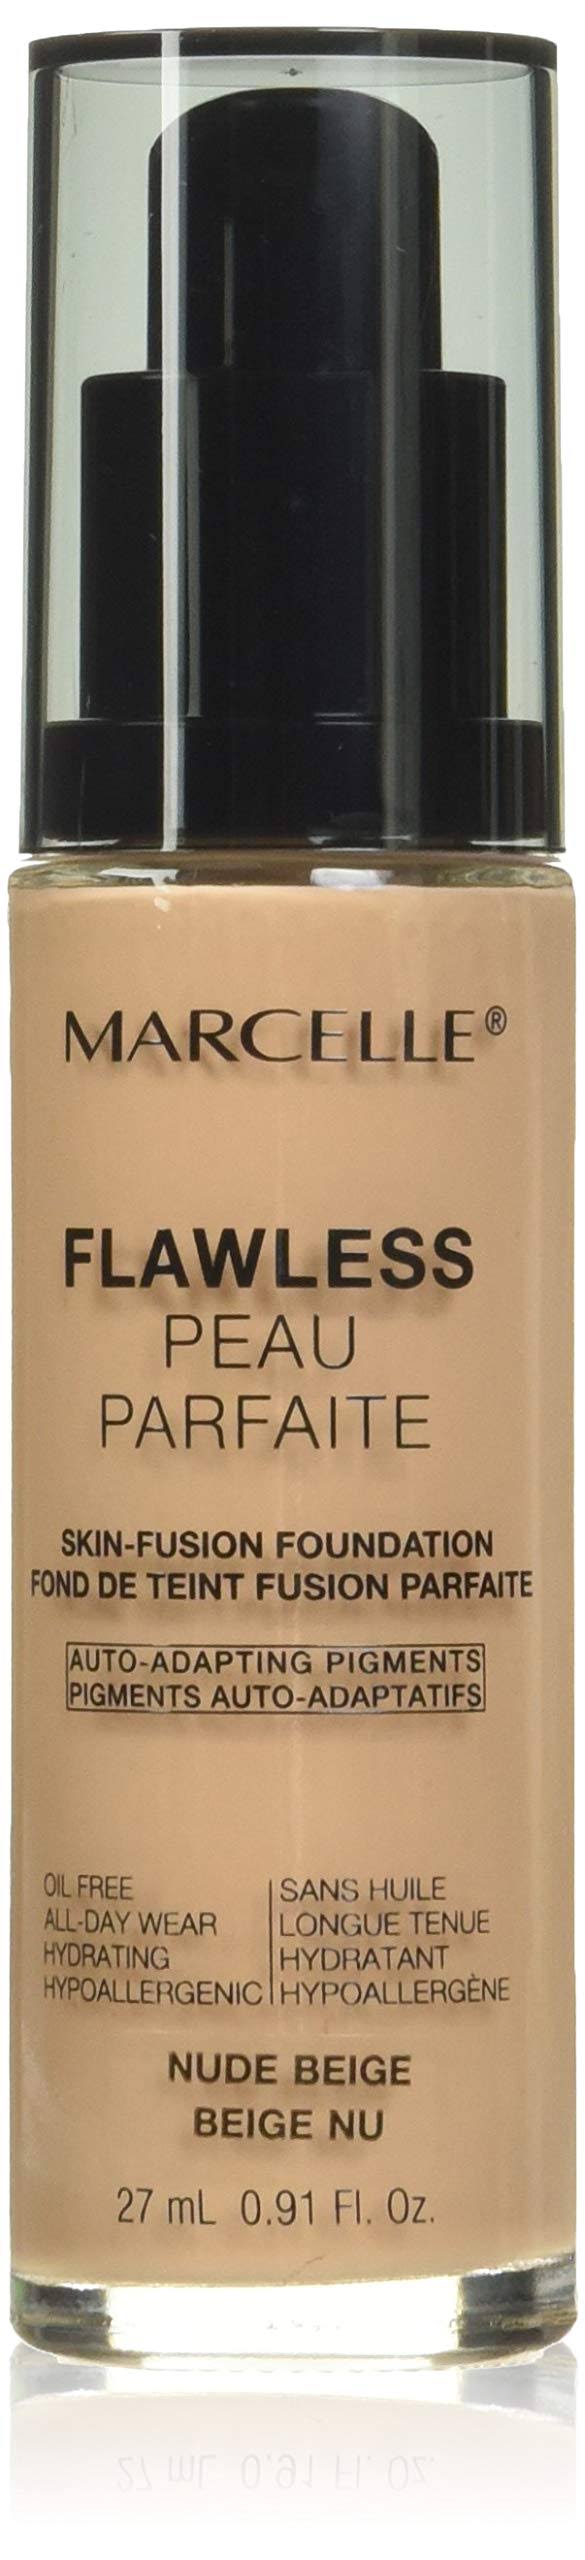 Marcelle Flawless Foundation, Nude Beige, Hypoallergenic and Fragrance